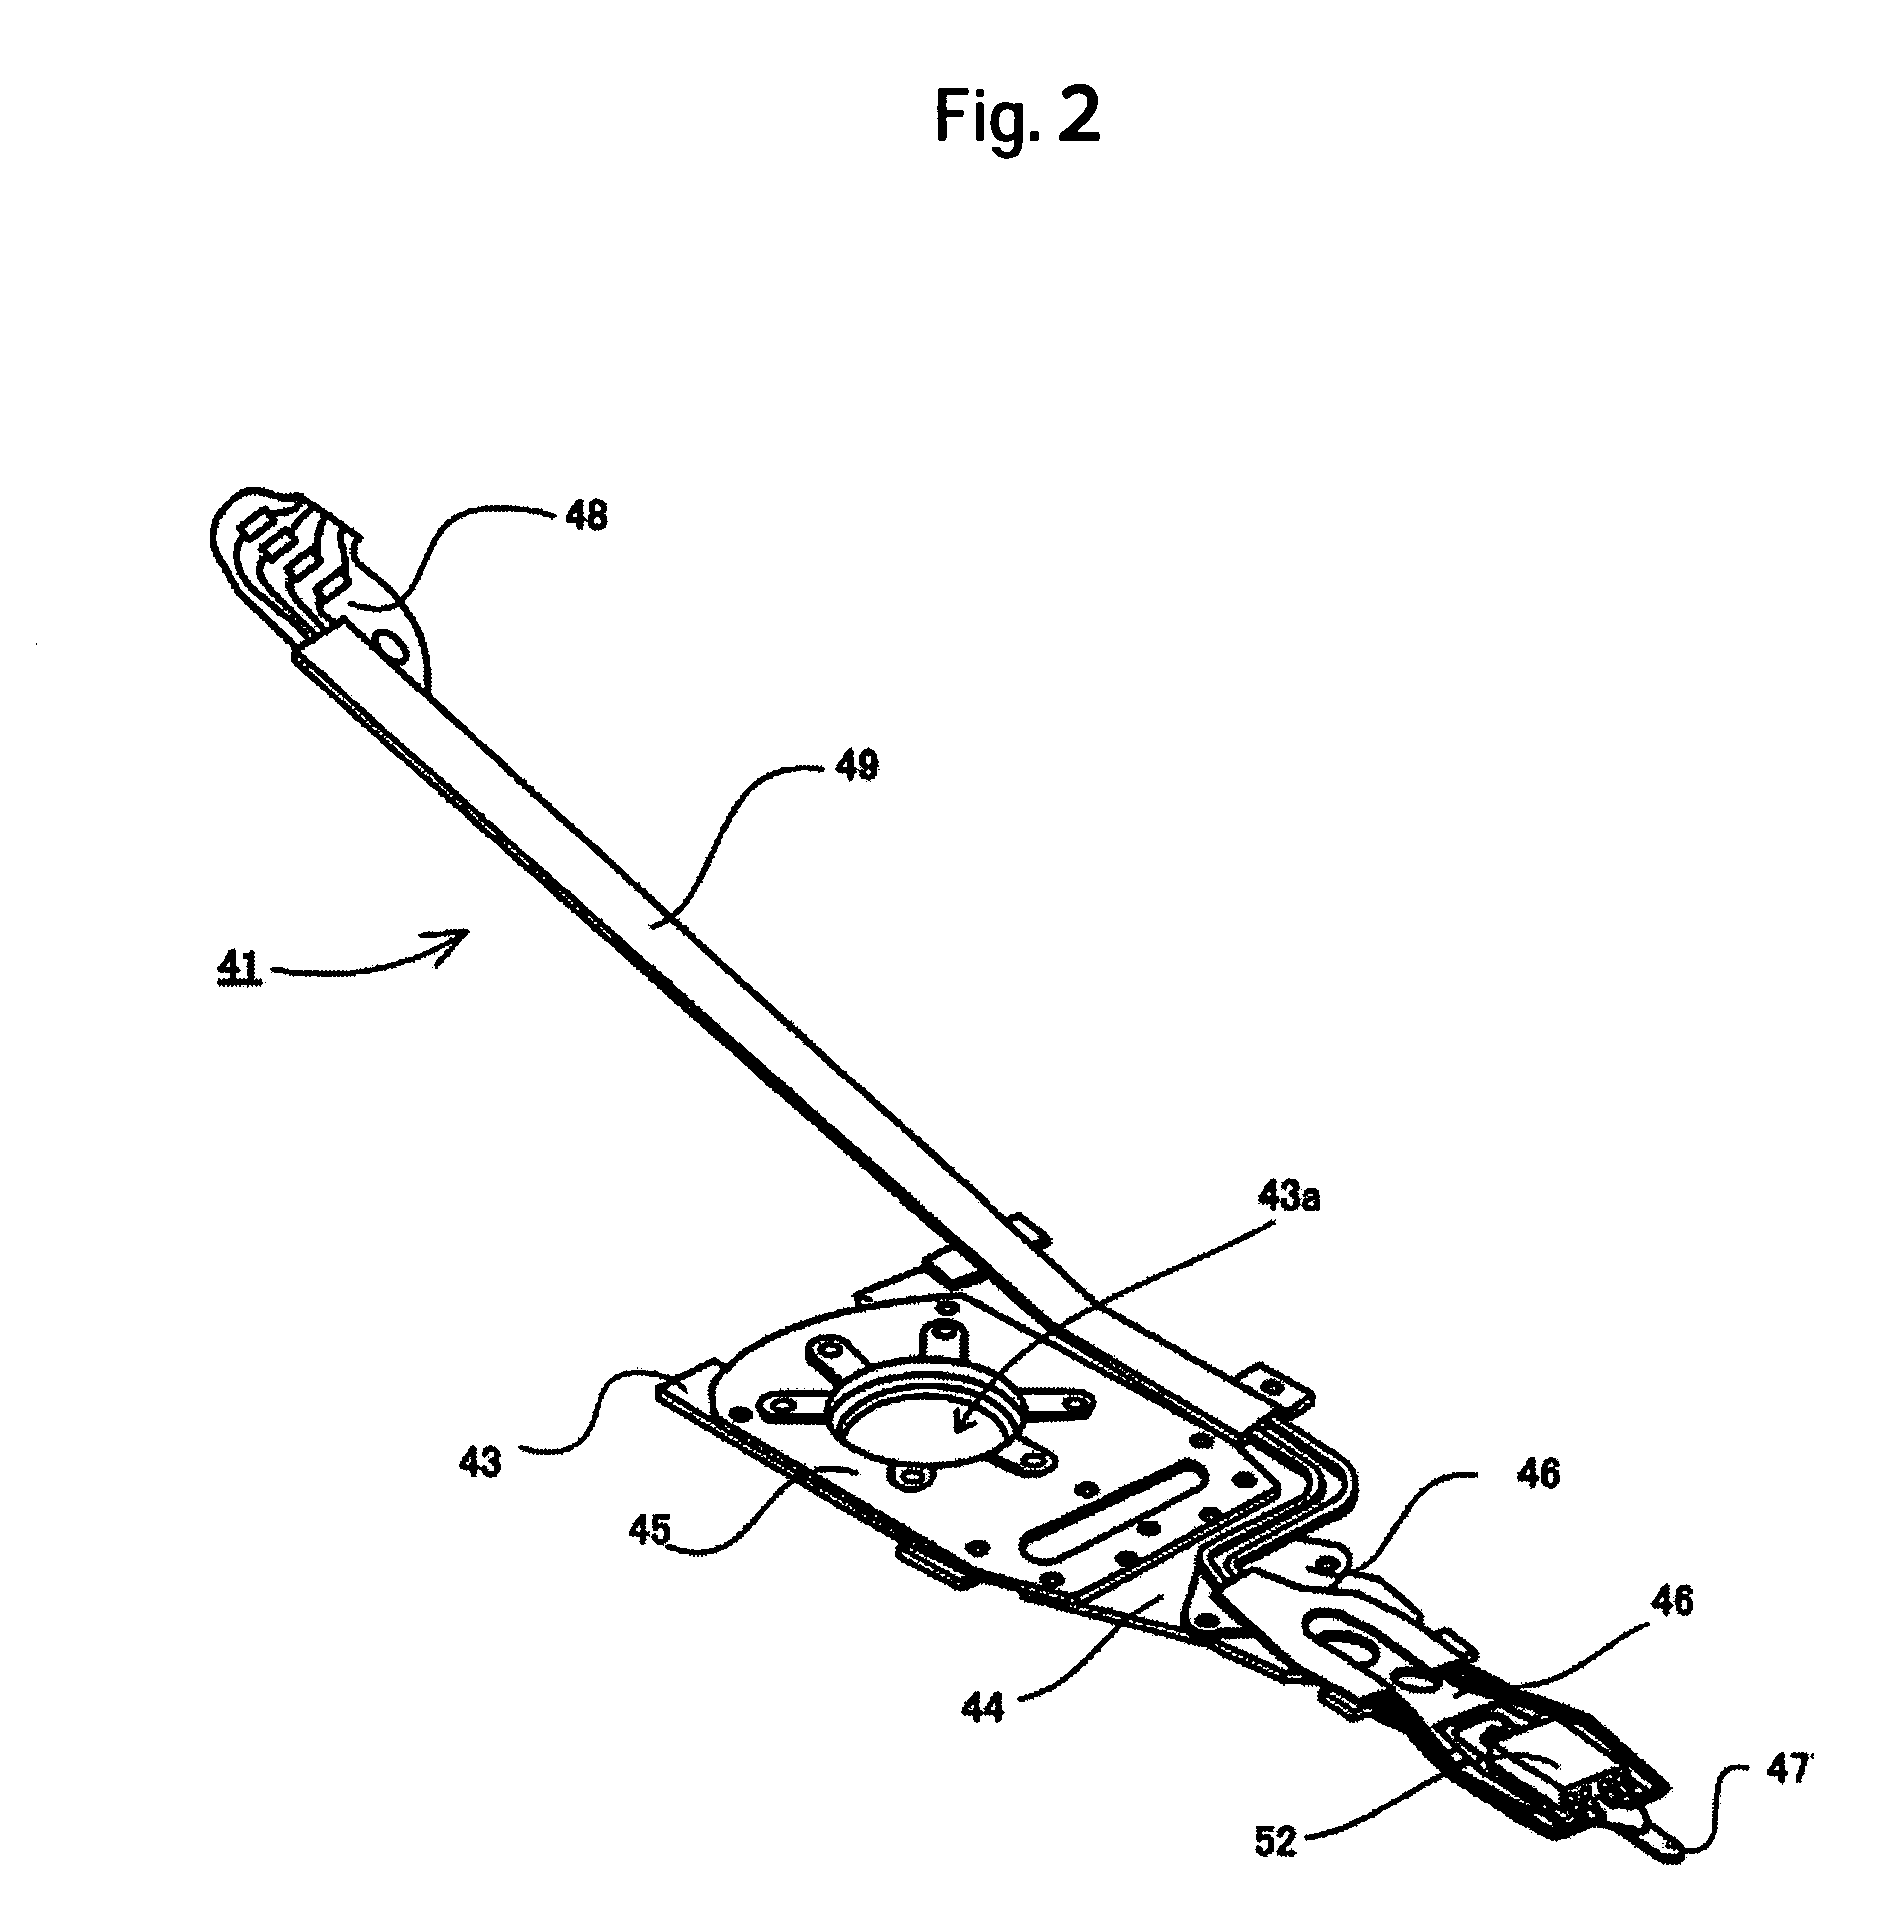 Head gimbal assembly and magnetic disk drive with solder ball connection